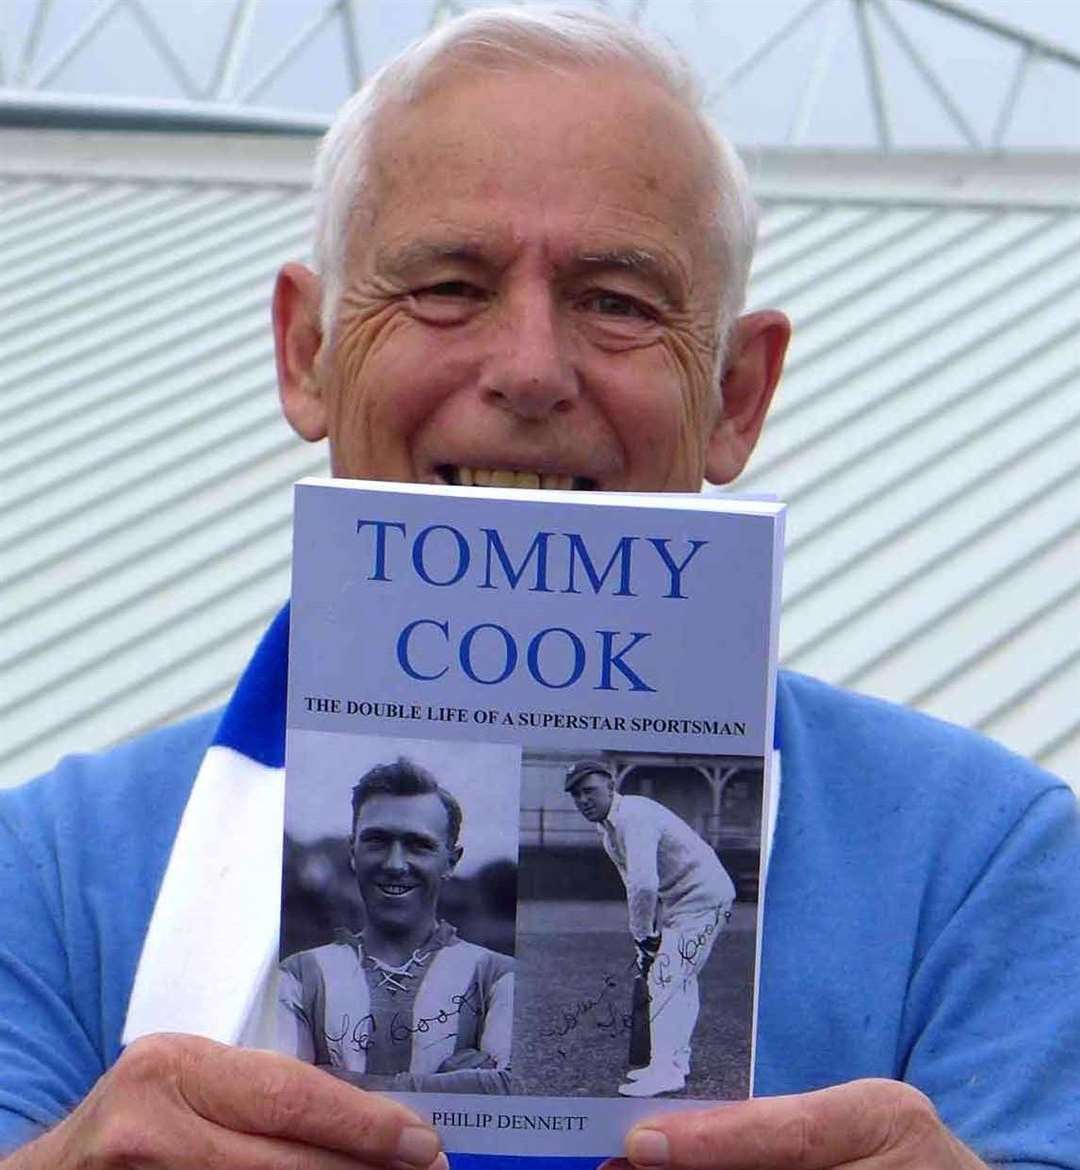 Author Phil Dennett with his book, “Tommy Cook, The Double Life of a Superstar Sportsman”